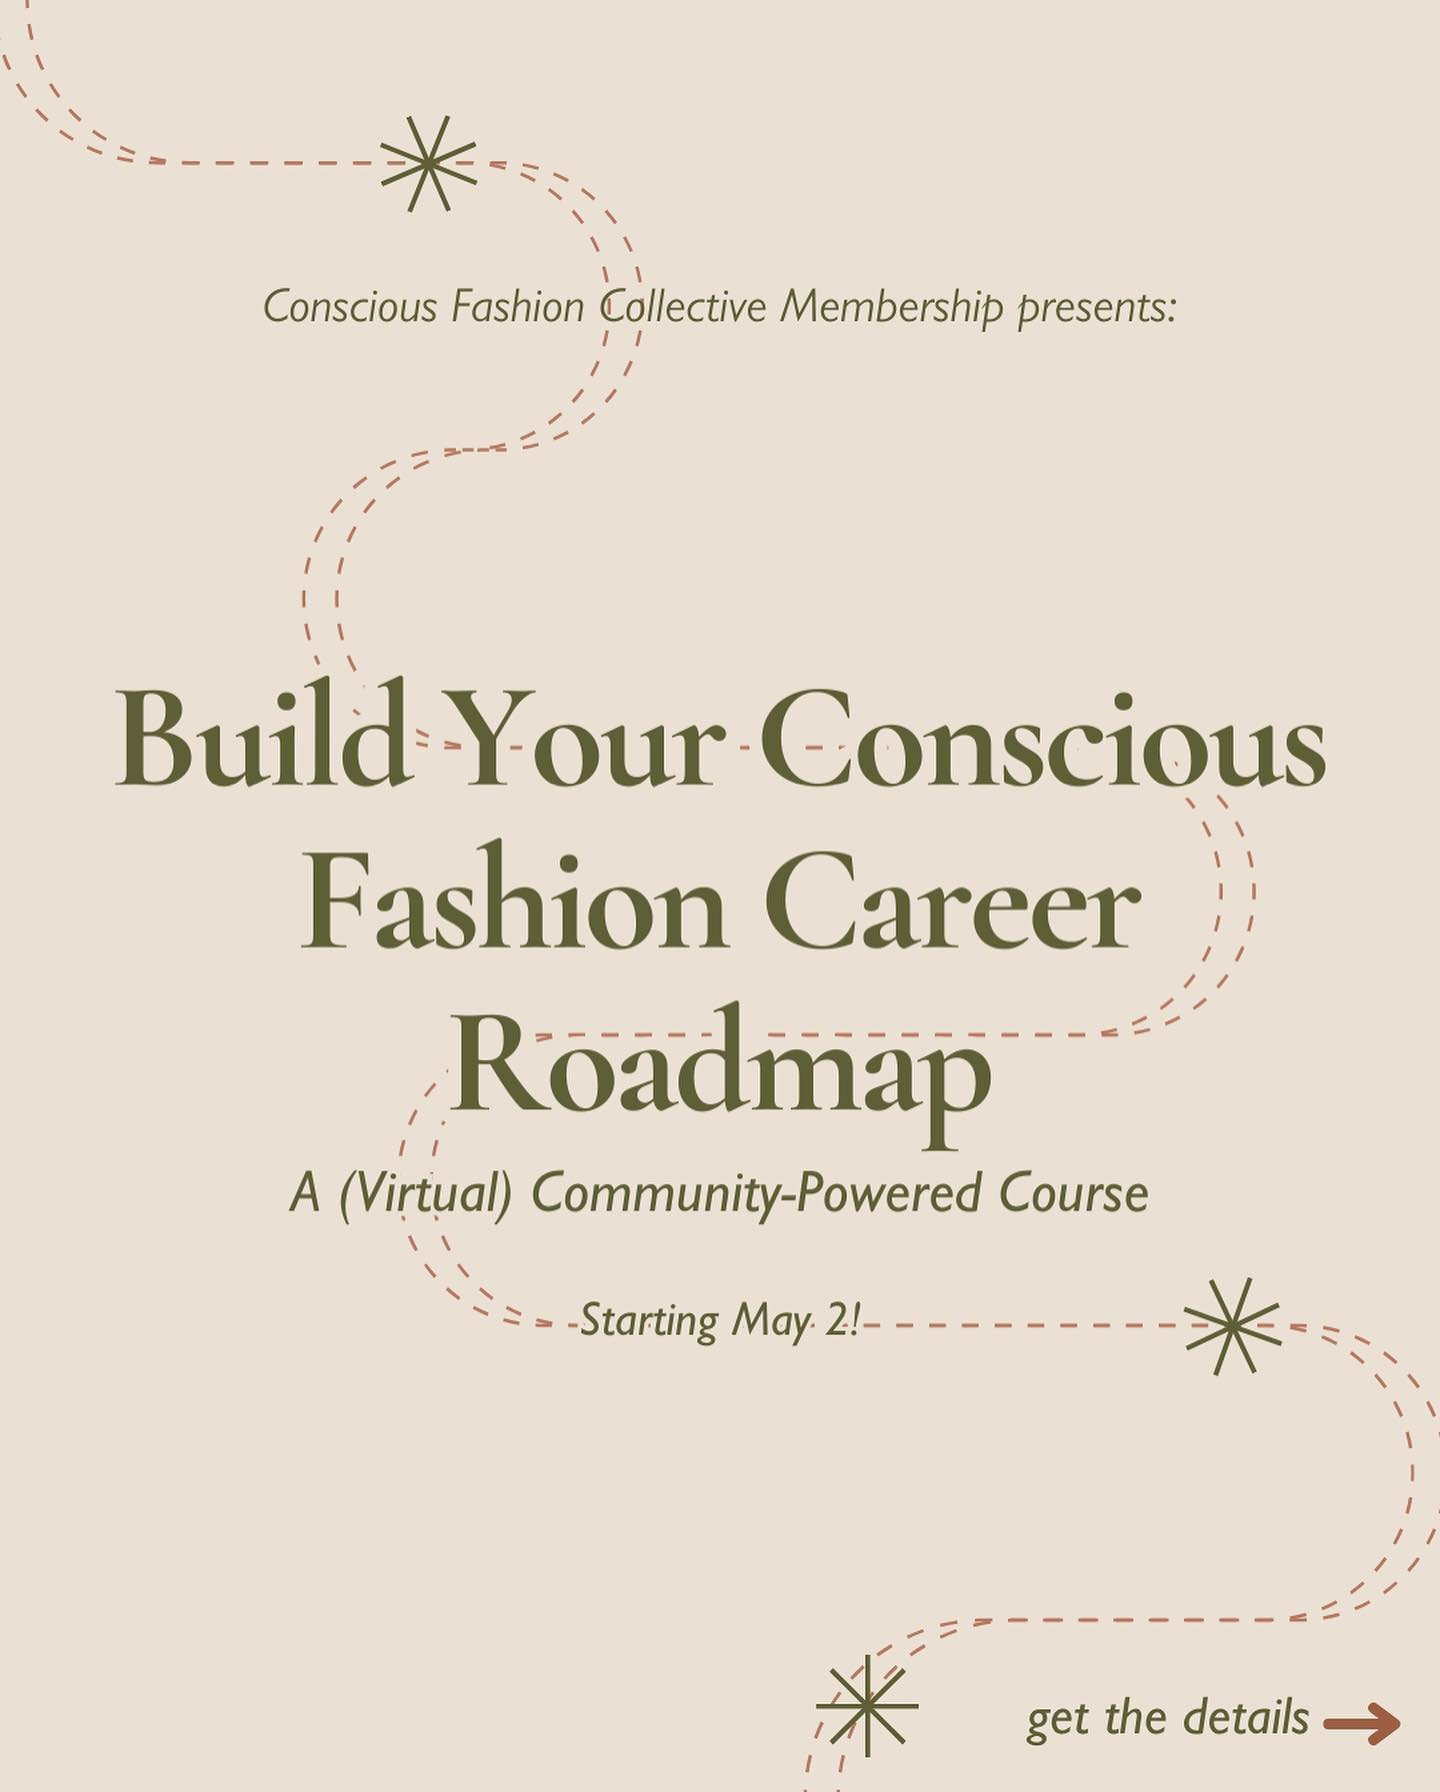 🥳 Big news! We&rsquo;re launching our first LIVE Community-Powered Course on May 2nd: Build Your Conscious Fashion Career Roadmap.⁠
⁠
After completing this 4-week course, you will leave with&hellip;⁠
A birds-eye view of the sustainable fashion lands